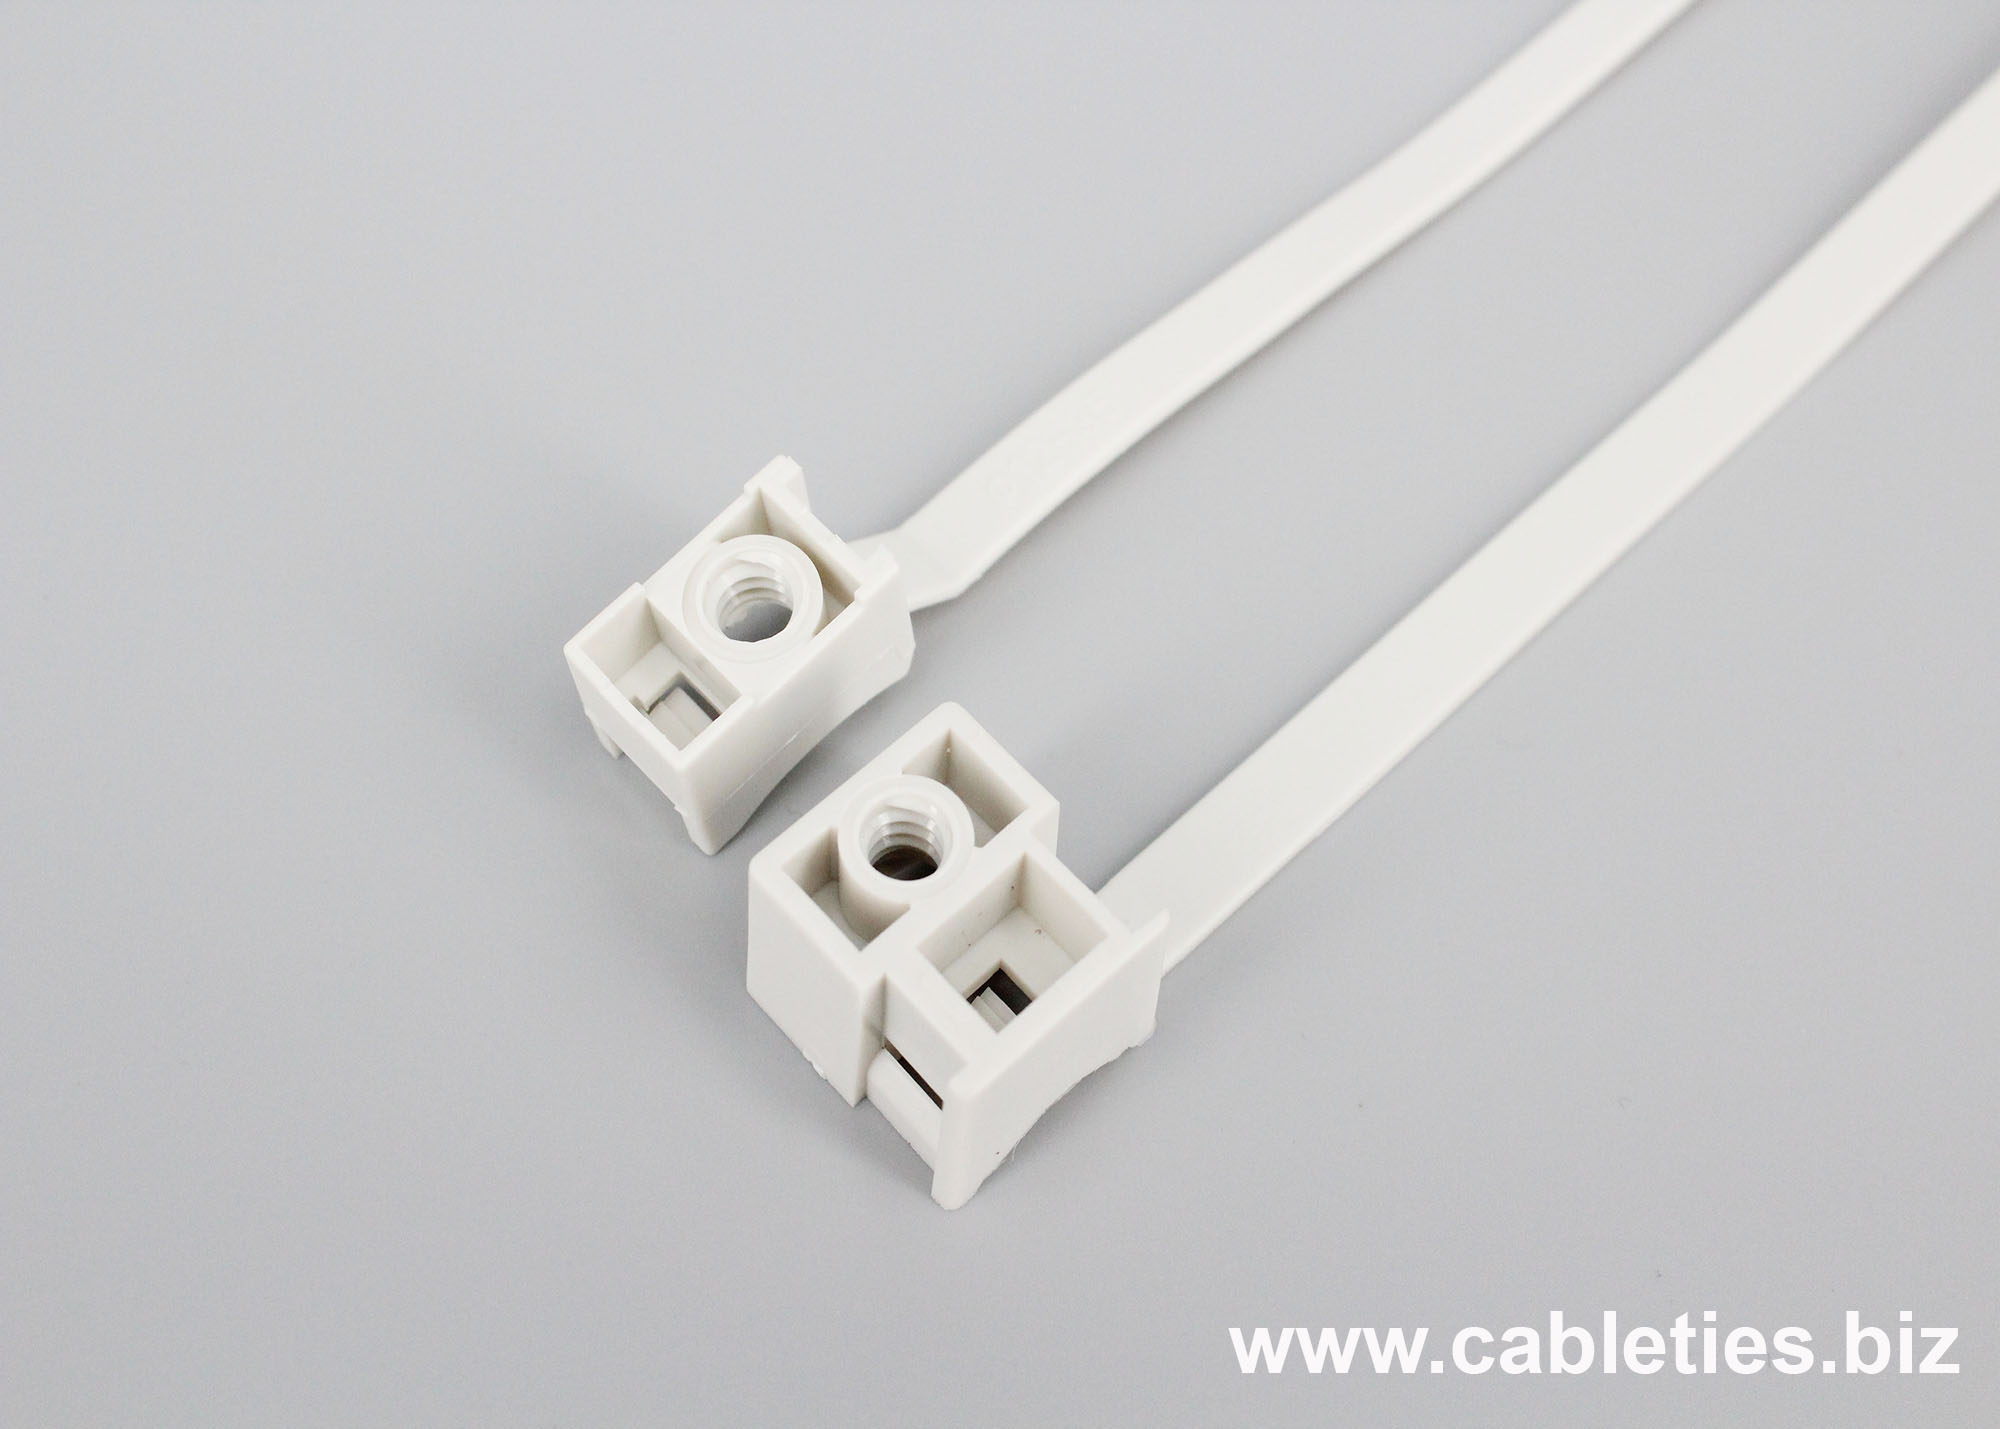 mounting cable tie